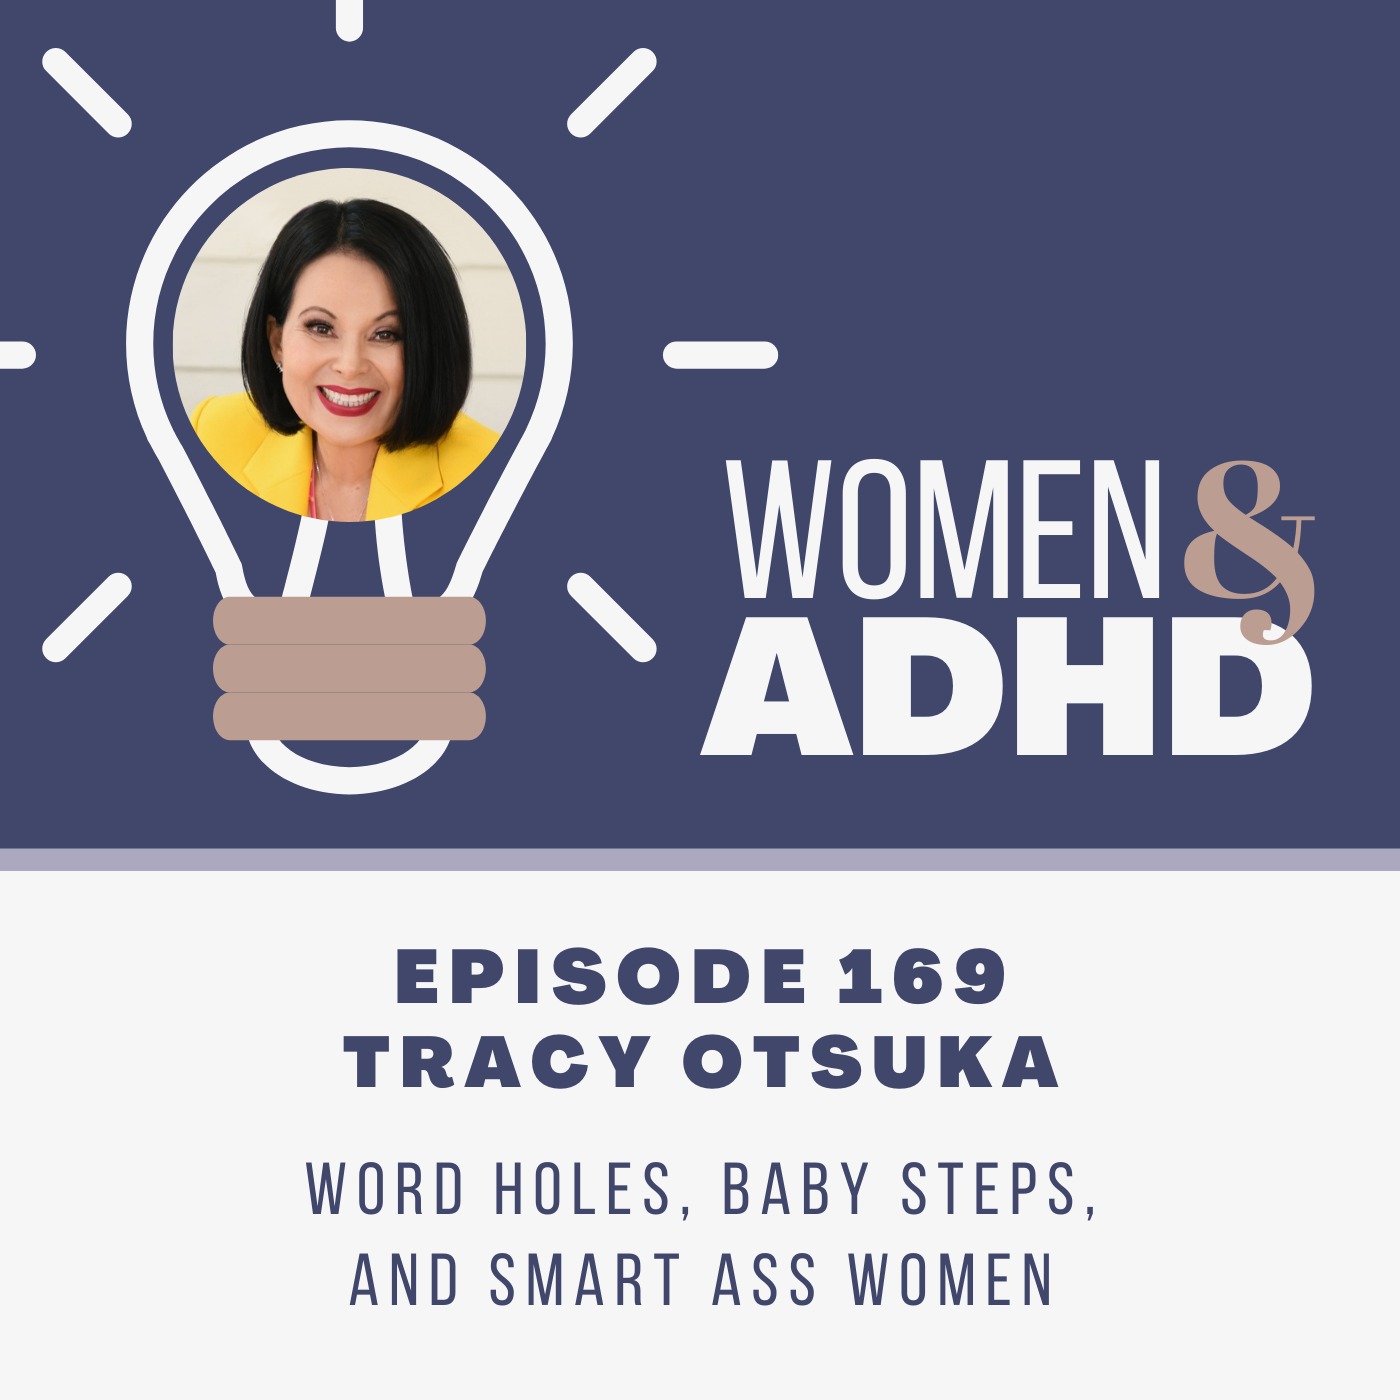 Tracy Otsuka: Word holes, baby steps, and smart ass women